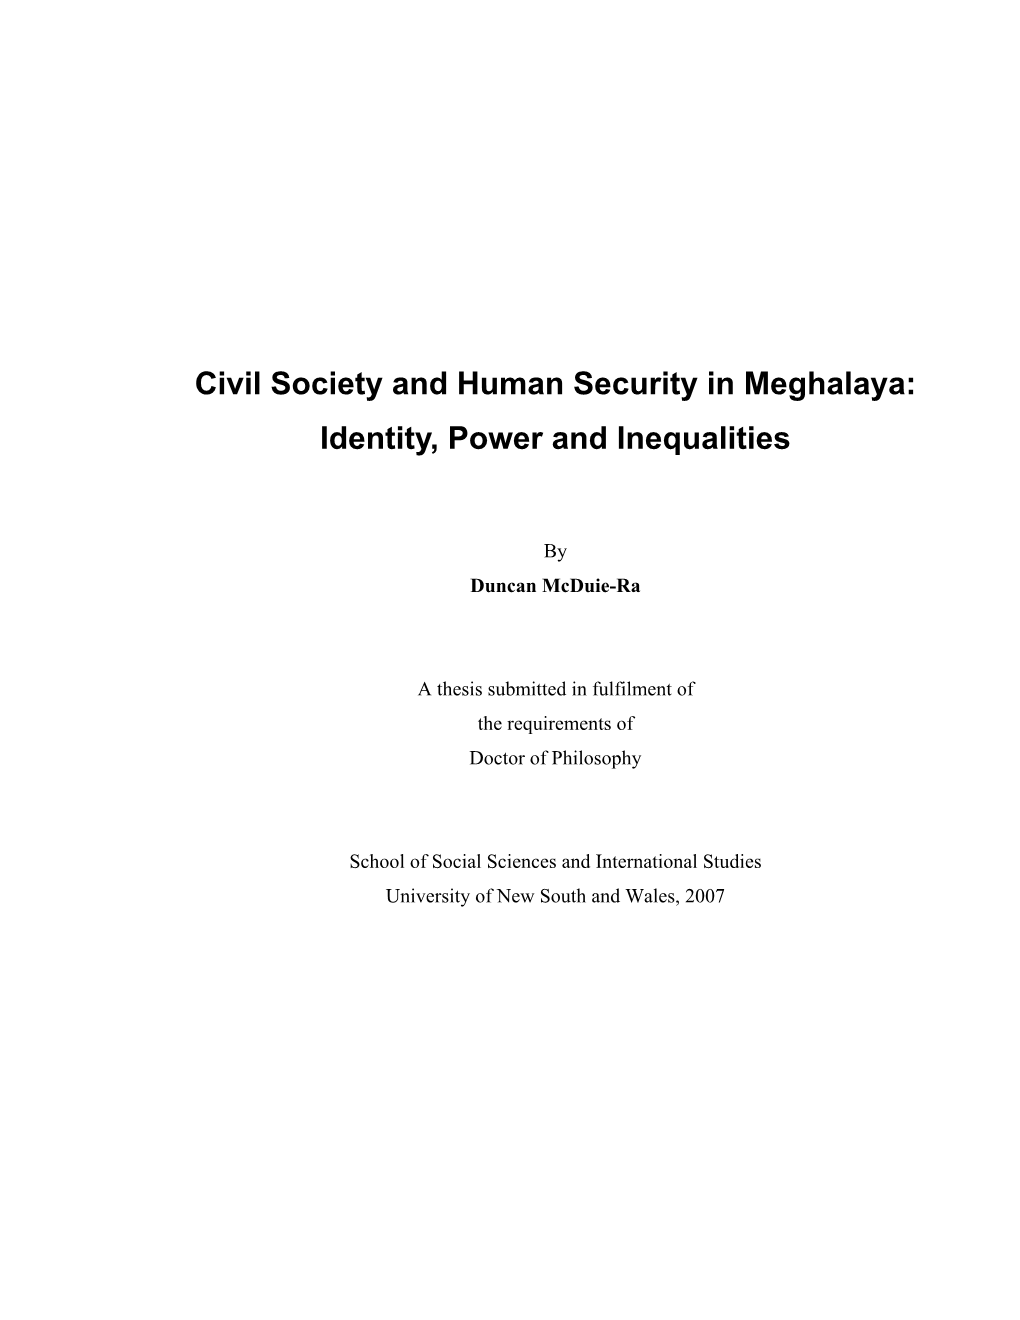 Civil Society and Human Security in Meghalaya: Identity, Power and Inequalities